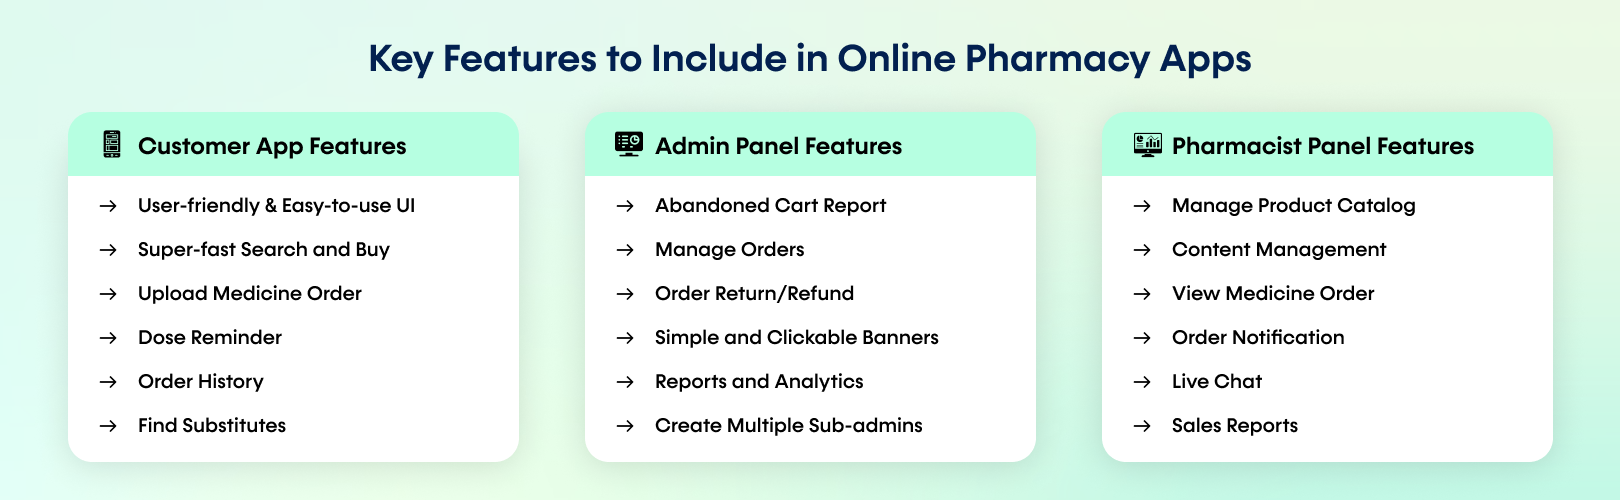 Key Features to Include in Online Pharmacy Apps